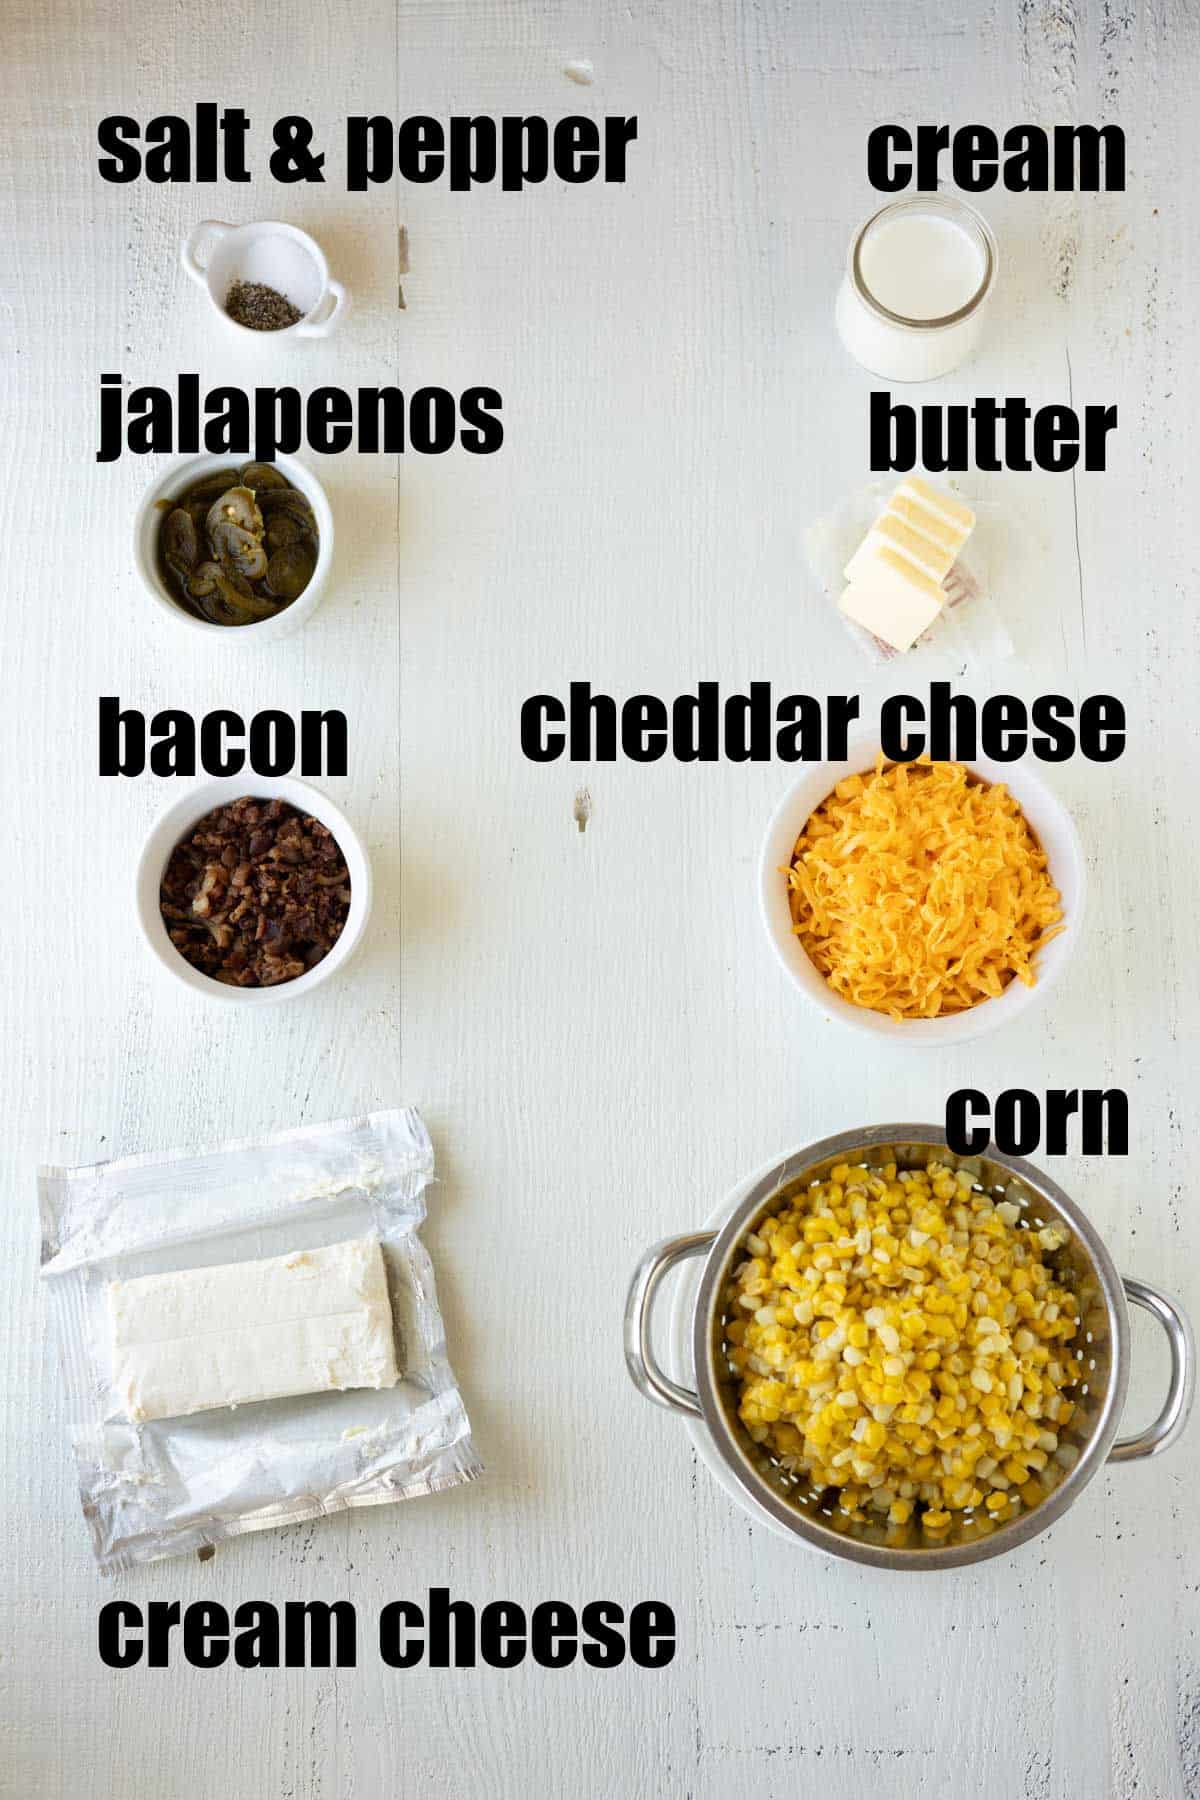 Images needed to make cheesy corn with cream cheese in the crockpot.